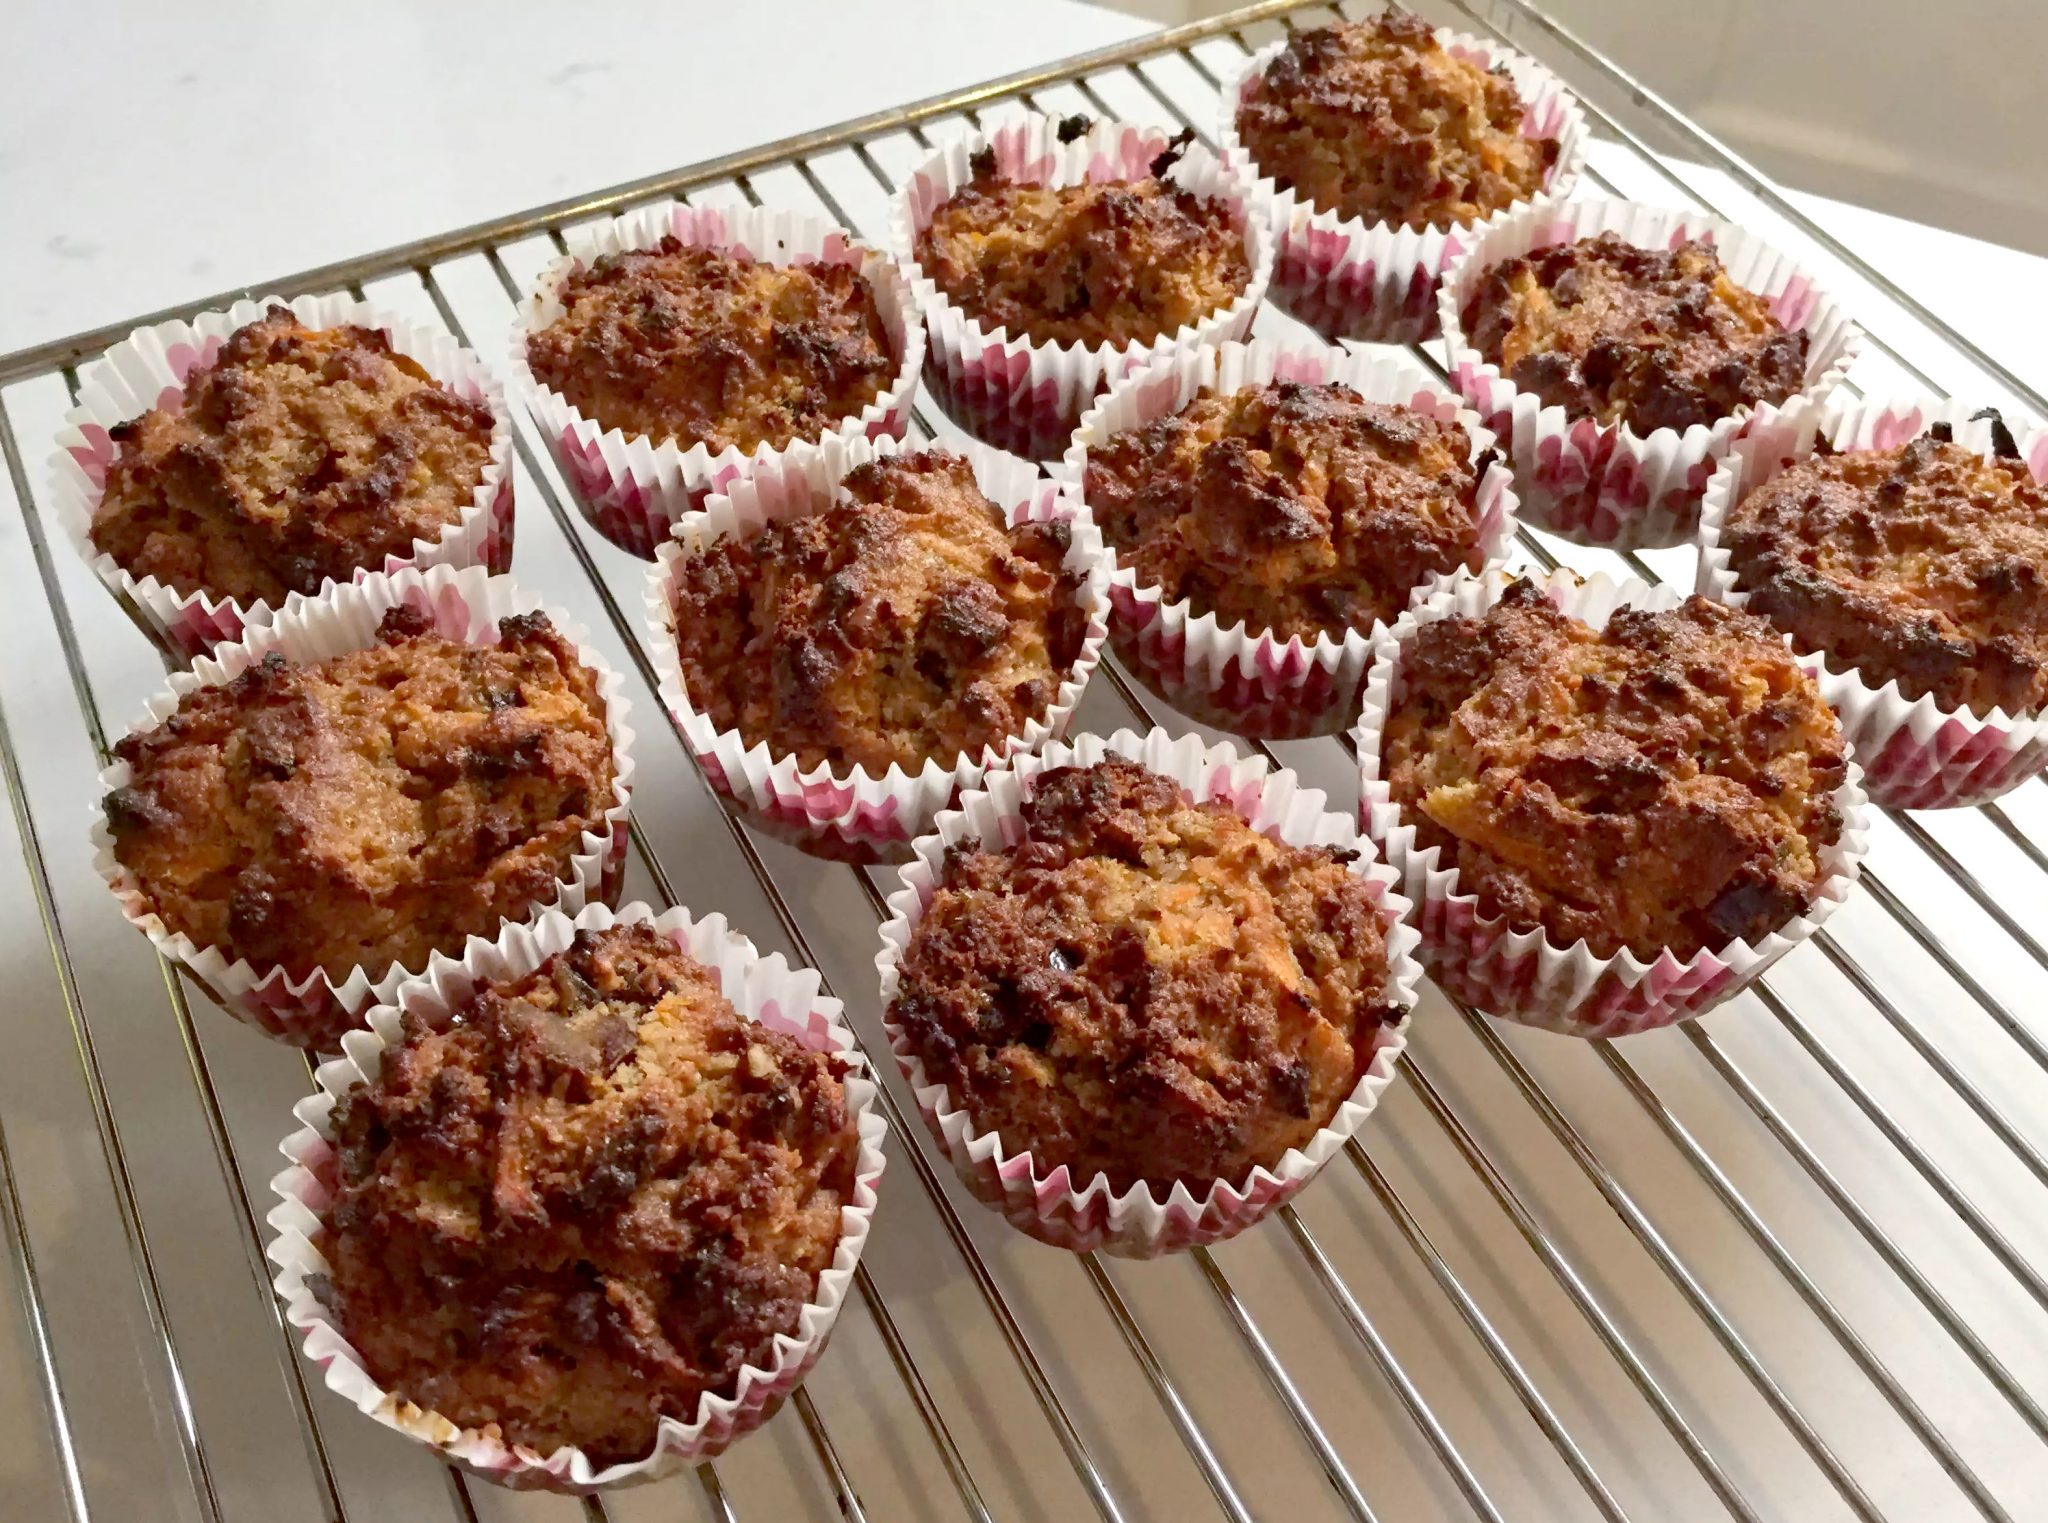 Carrot Cake Muffins SCD Paleo Almond Coconut Oil Honey Baking Specific Carbohydrate Diet Gluten-Free Grain Free Clean Eating Birthday